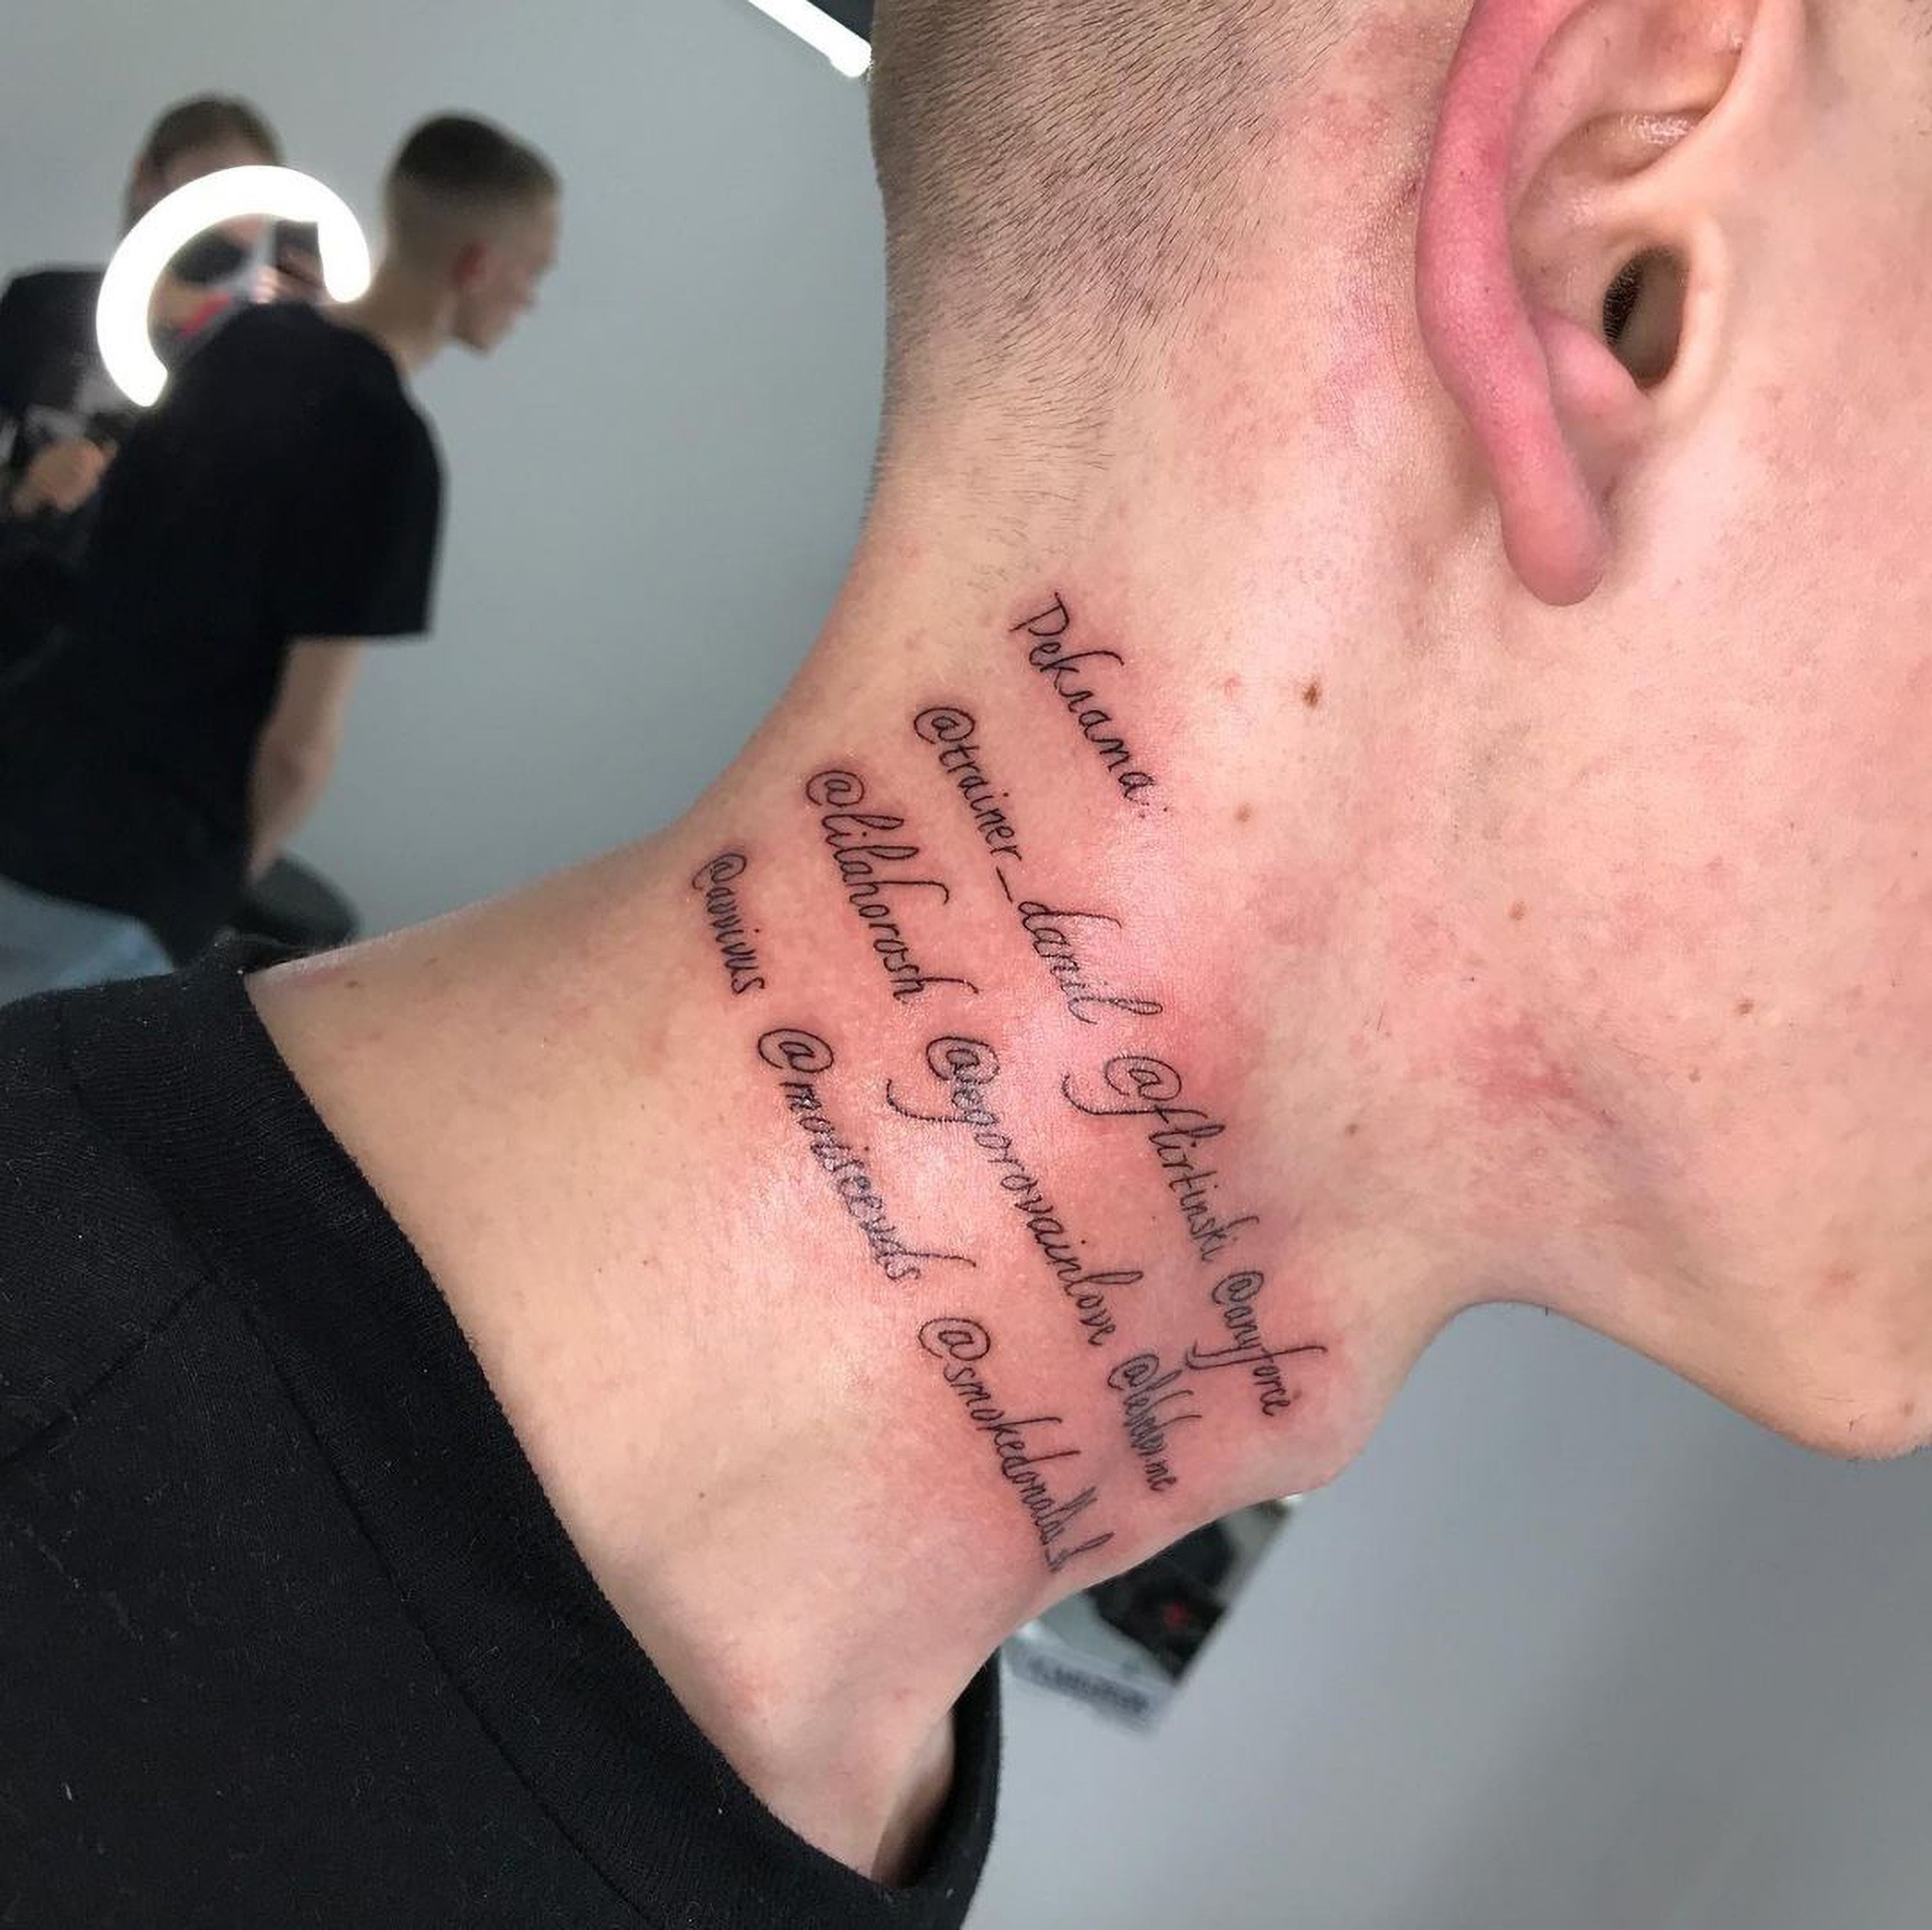 Read more about the article Influencer Tattoos Insta Handles On Neck After Selling It As Advertising Space